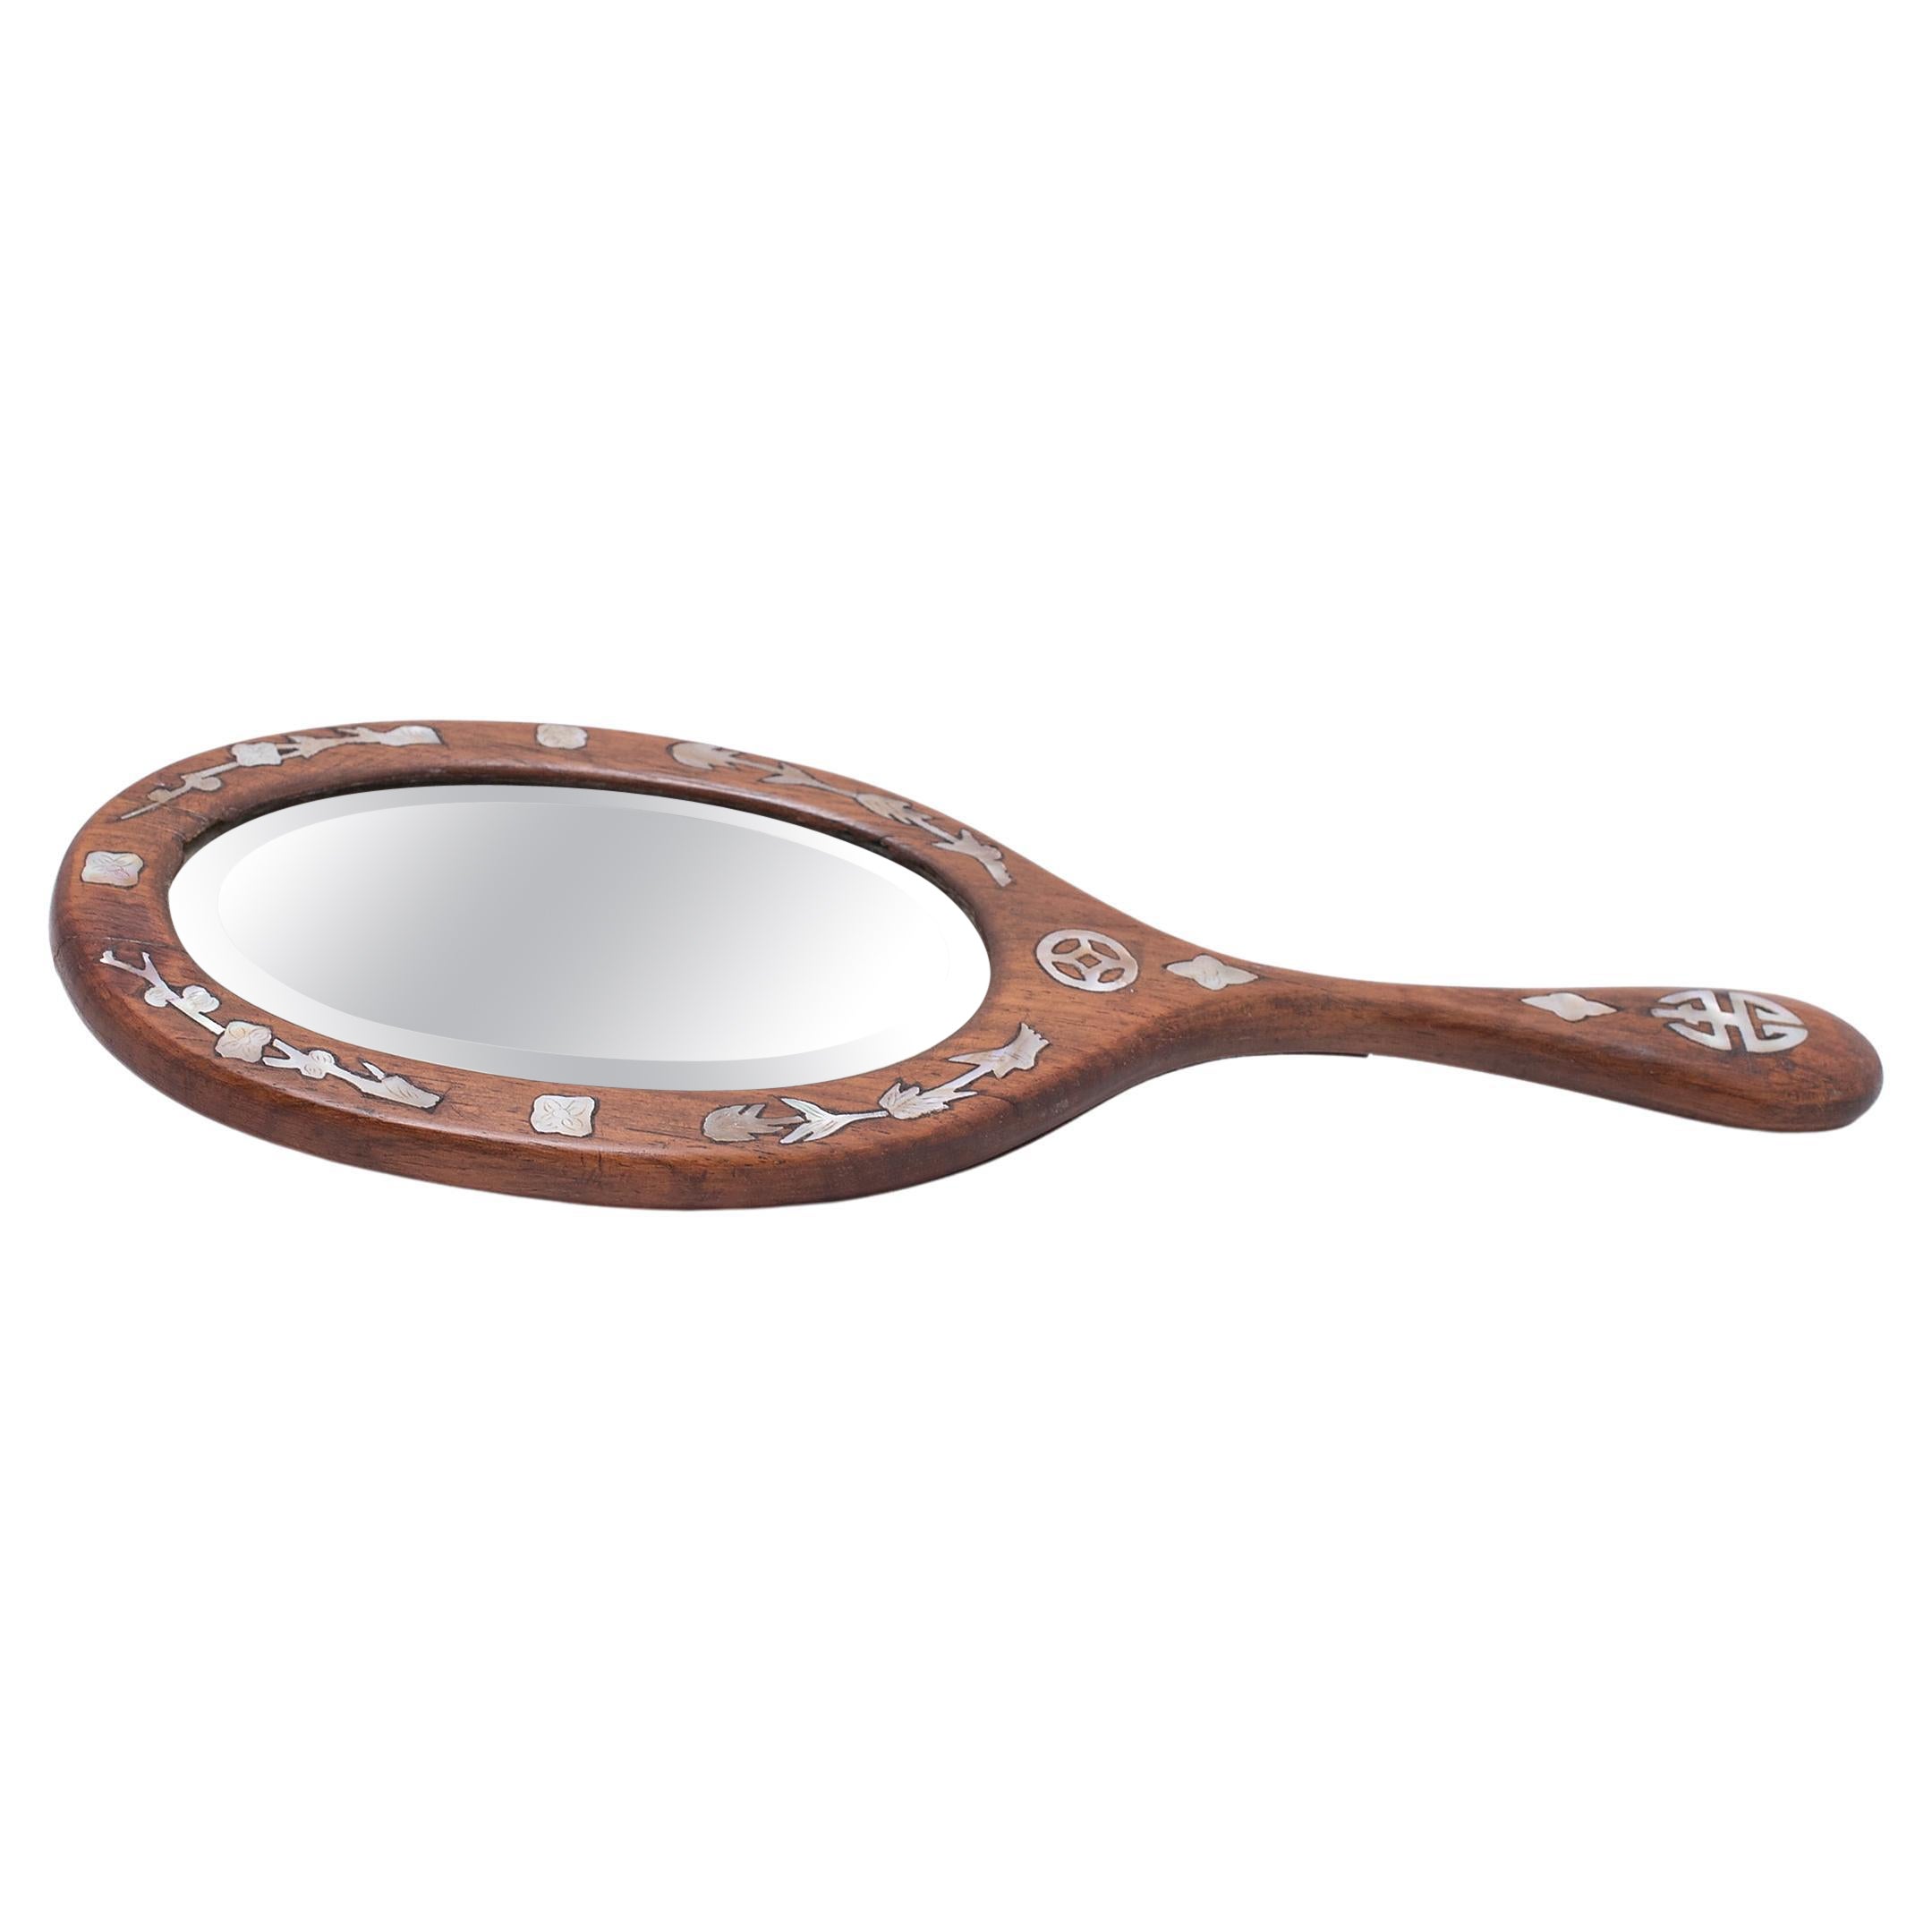 Chinese Oval Hand Mirror with Mother of Pearl Inlay, c. 1930 For Sale